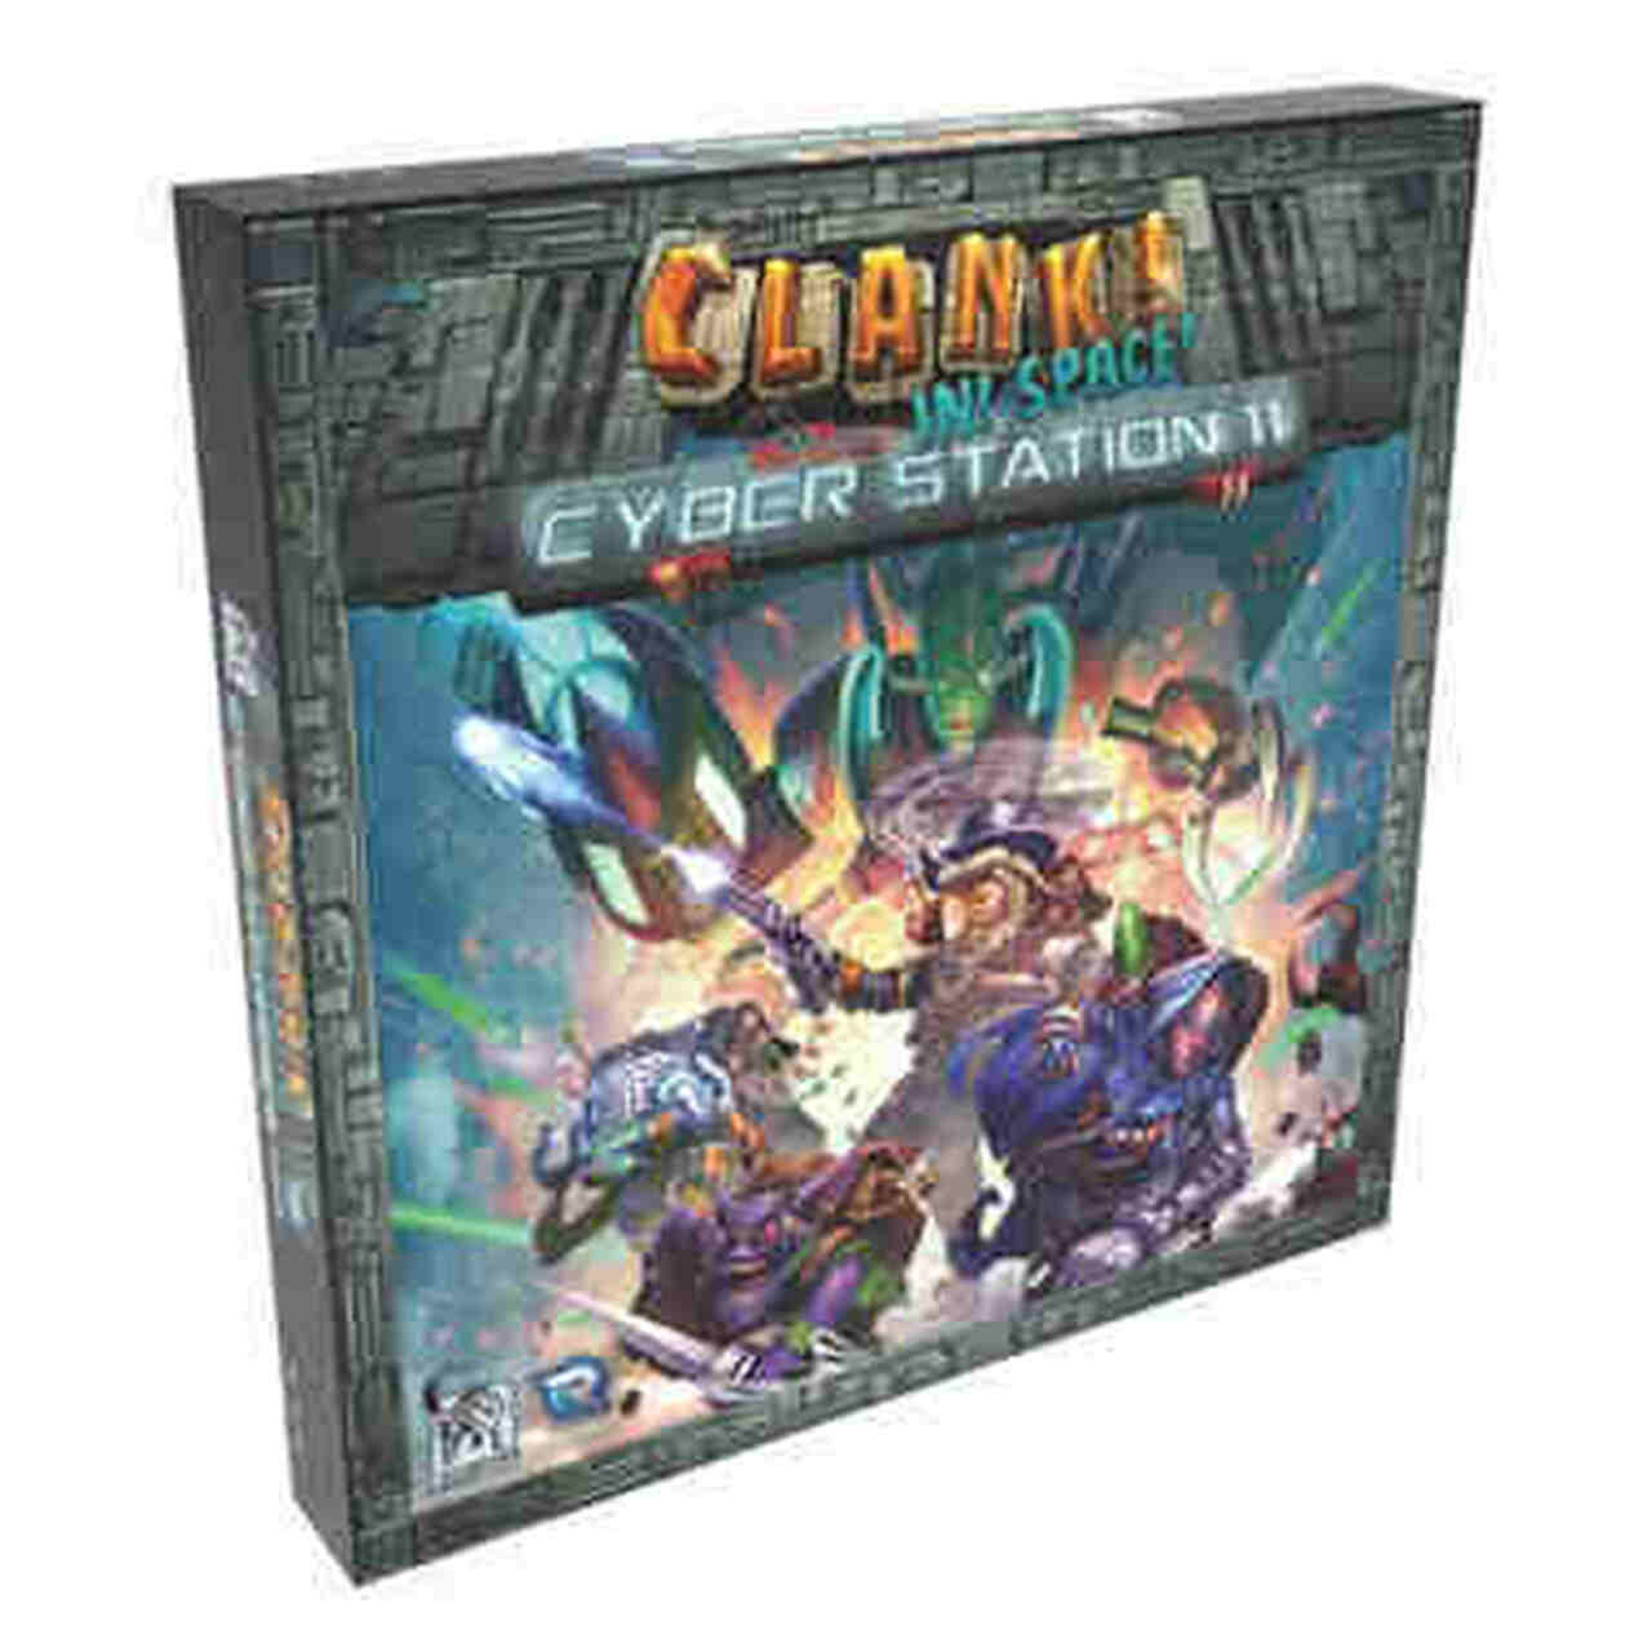 Clank! In! Space!: Cyber Station 11 Expansion